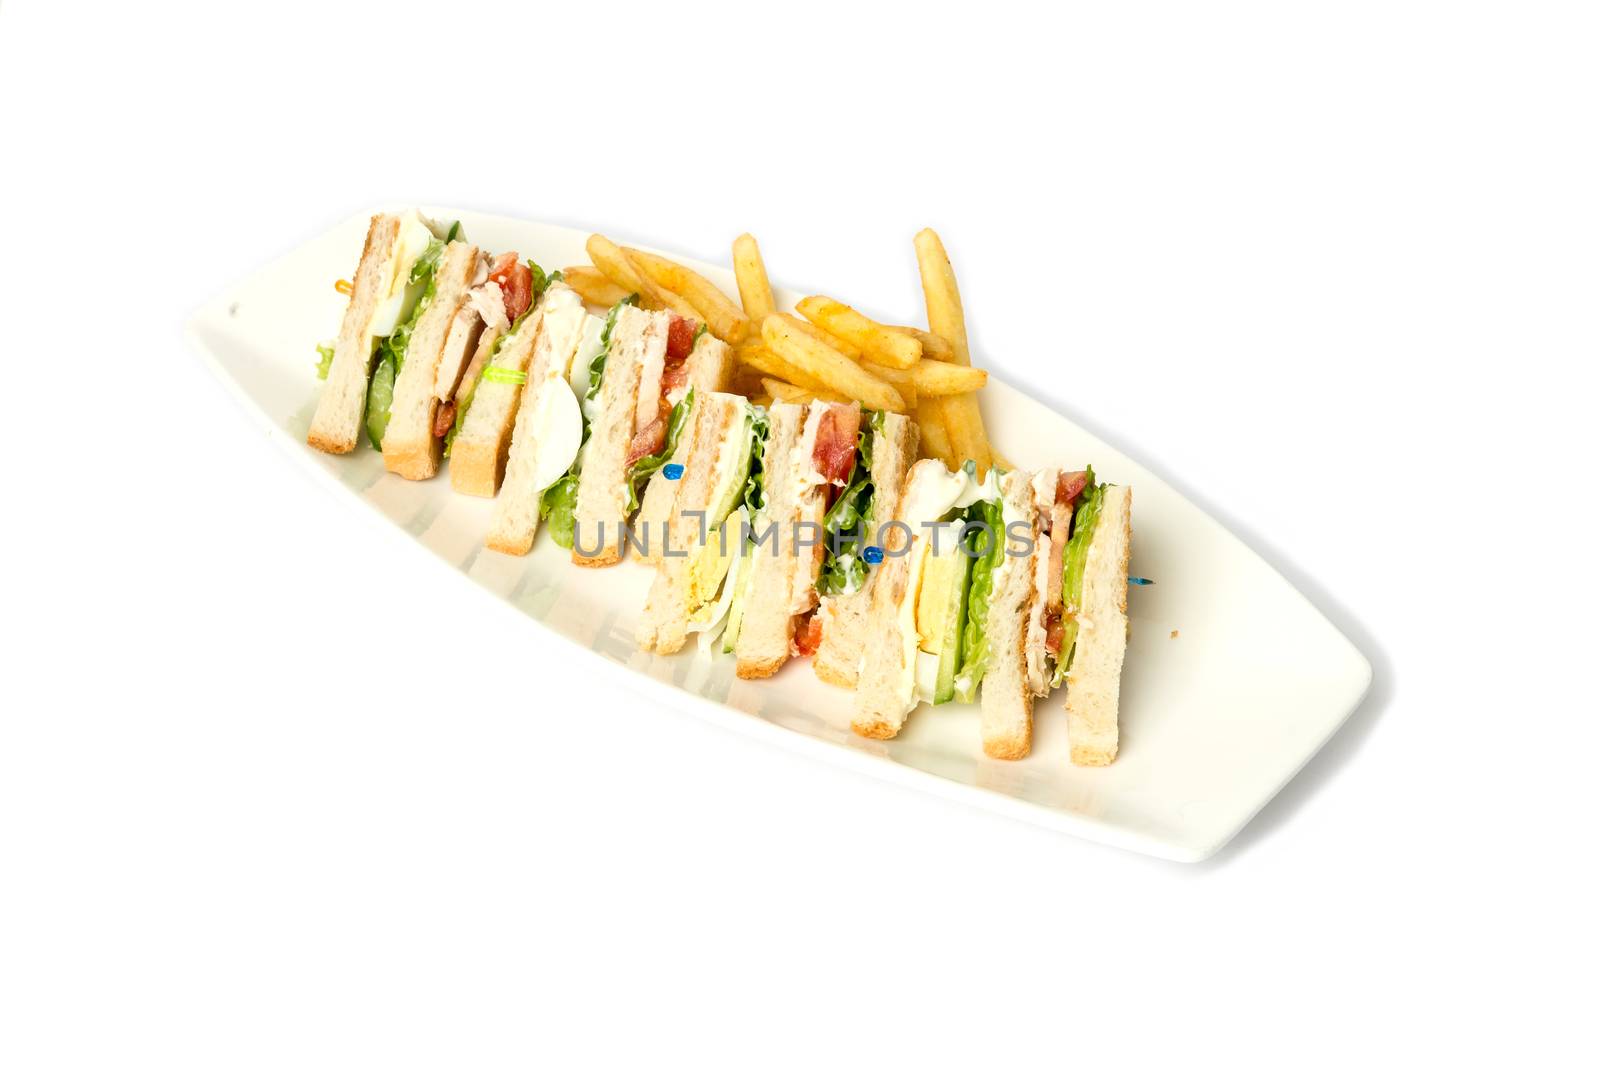 Club Sandwich with Cheese, Pickled Cucumber, Tomato and Smoked Meat. Garnished with French Fries